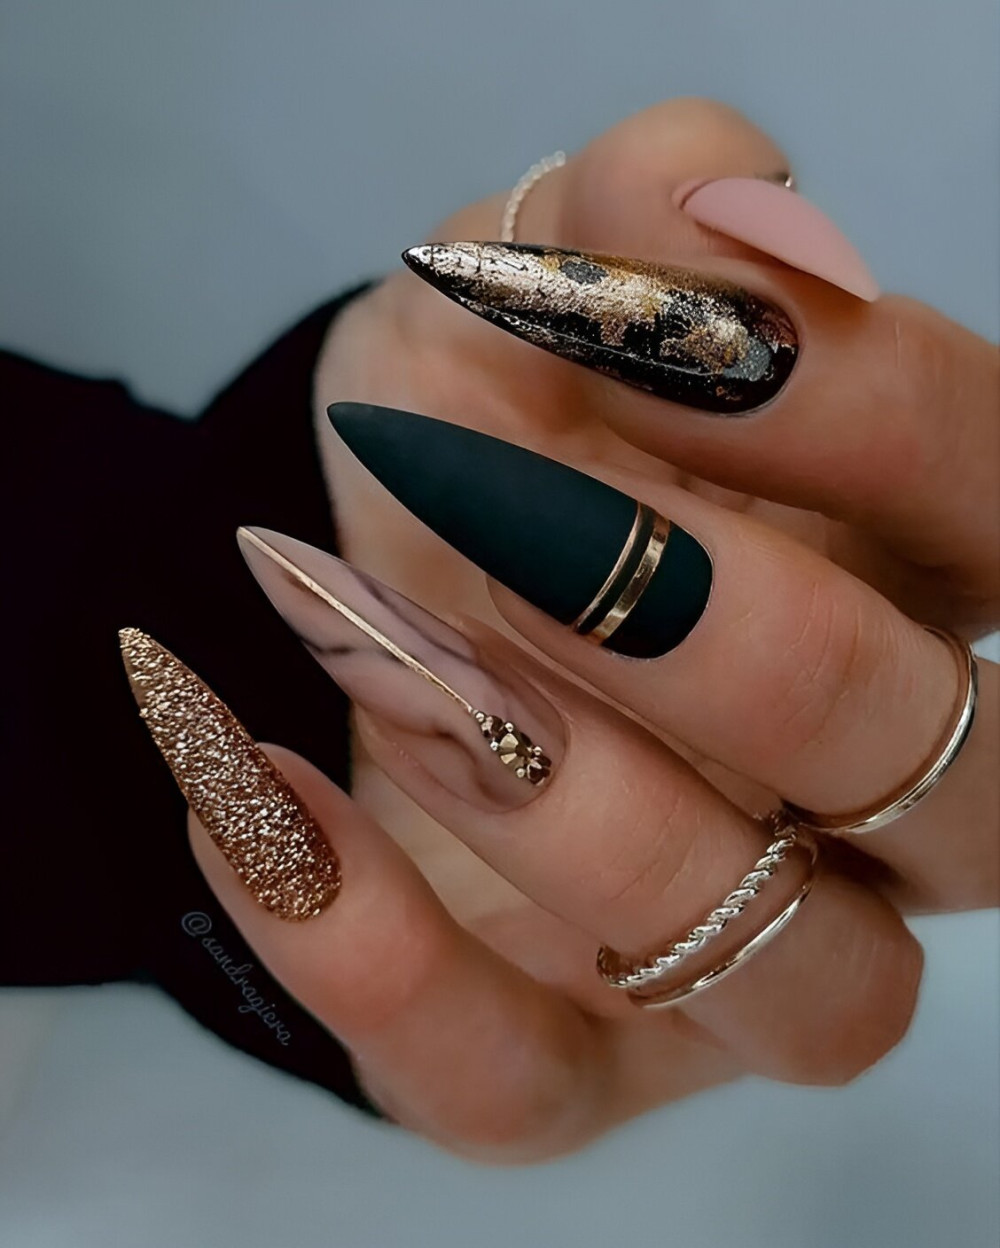 30 Mysterious And Dramatic Black Glitter Nail Designs That Are Top Glam - 221